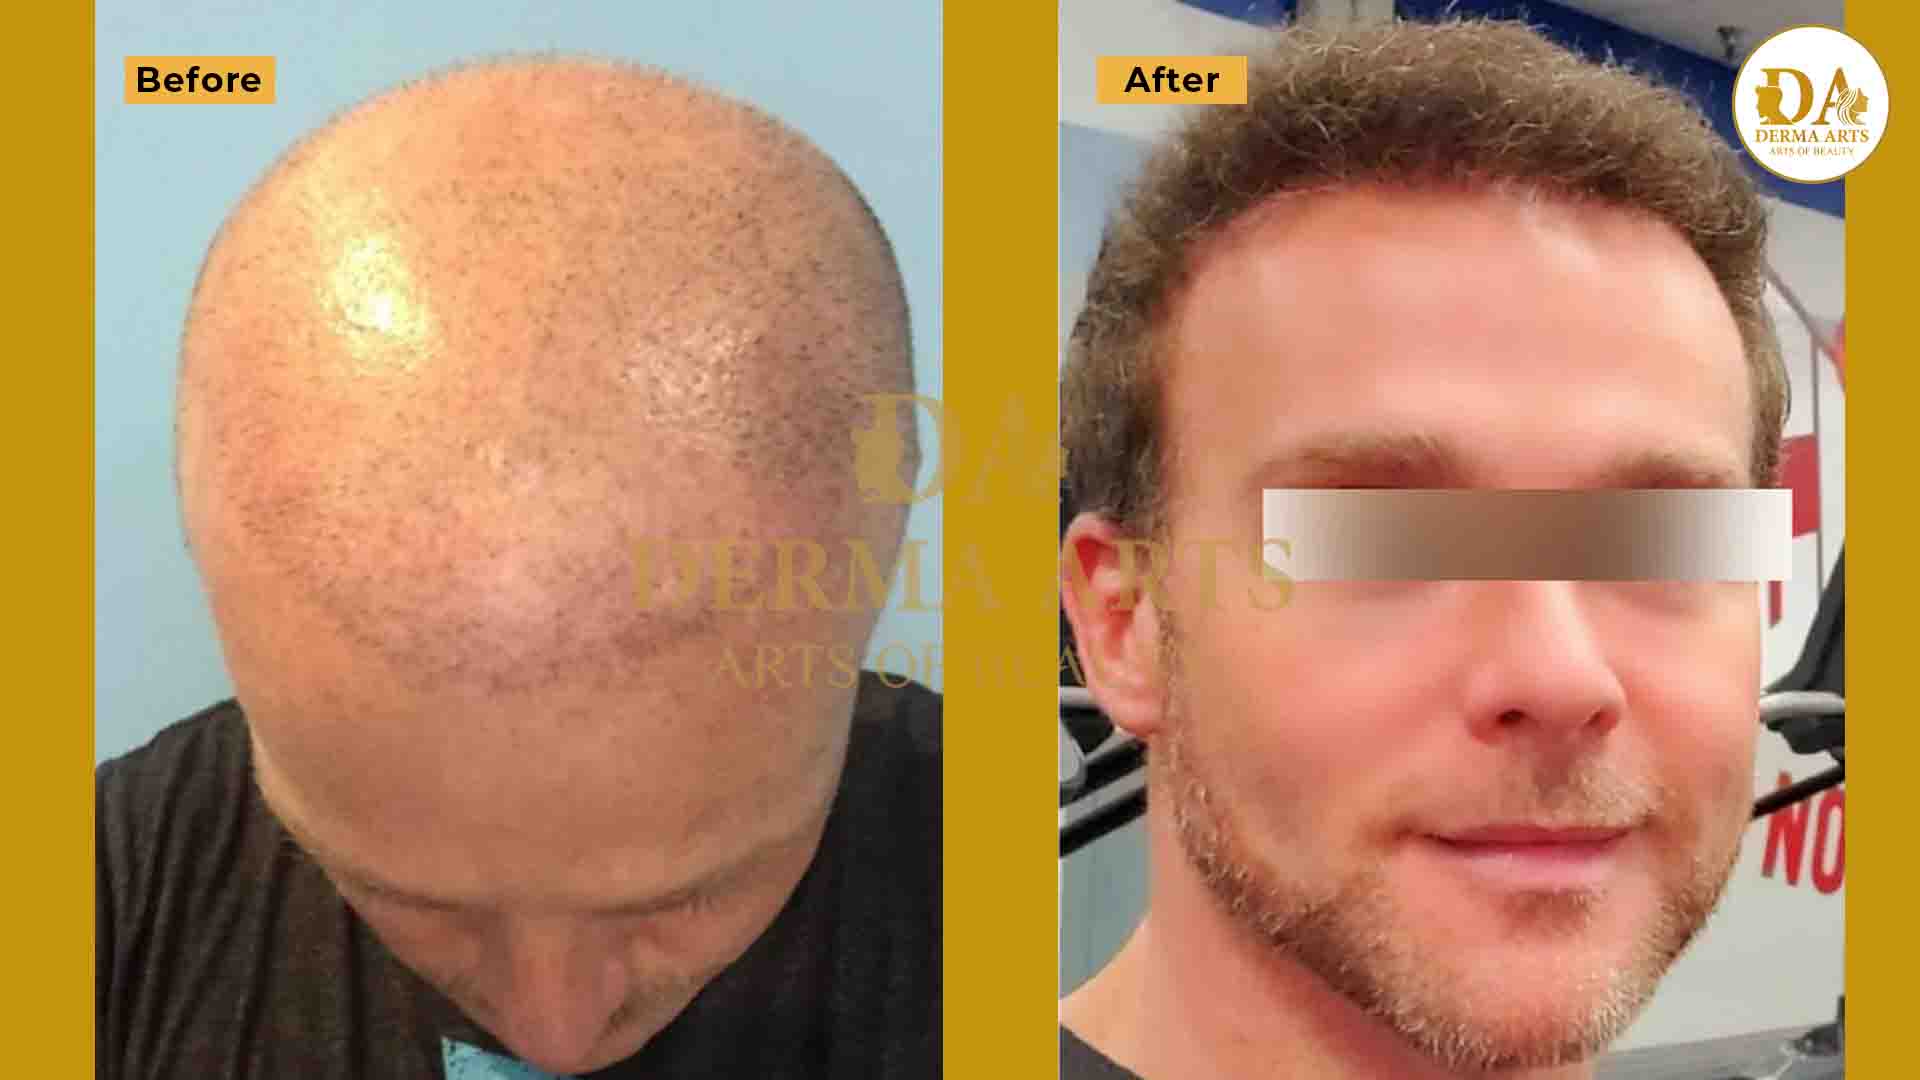 Results showing before and after hair transplant treatment